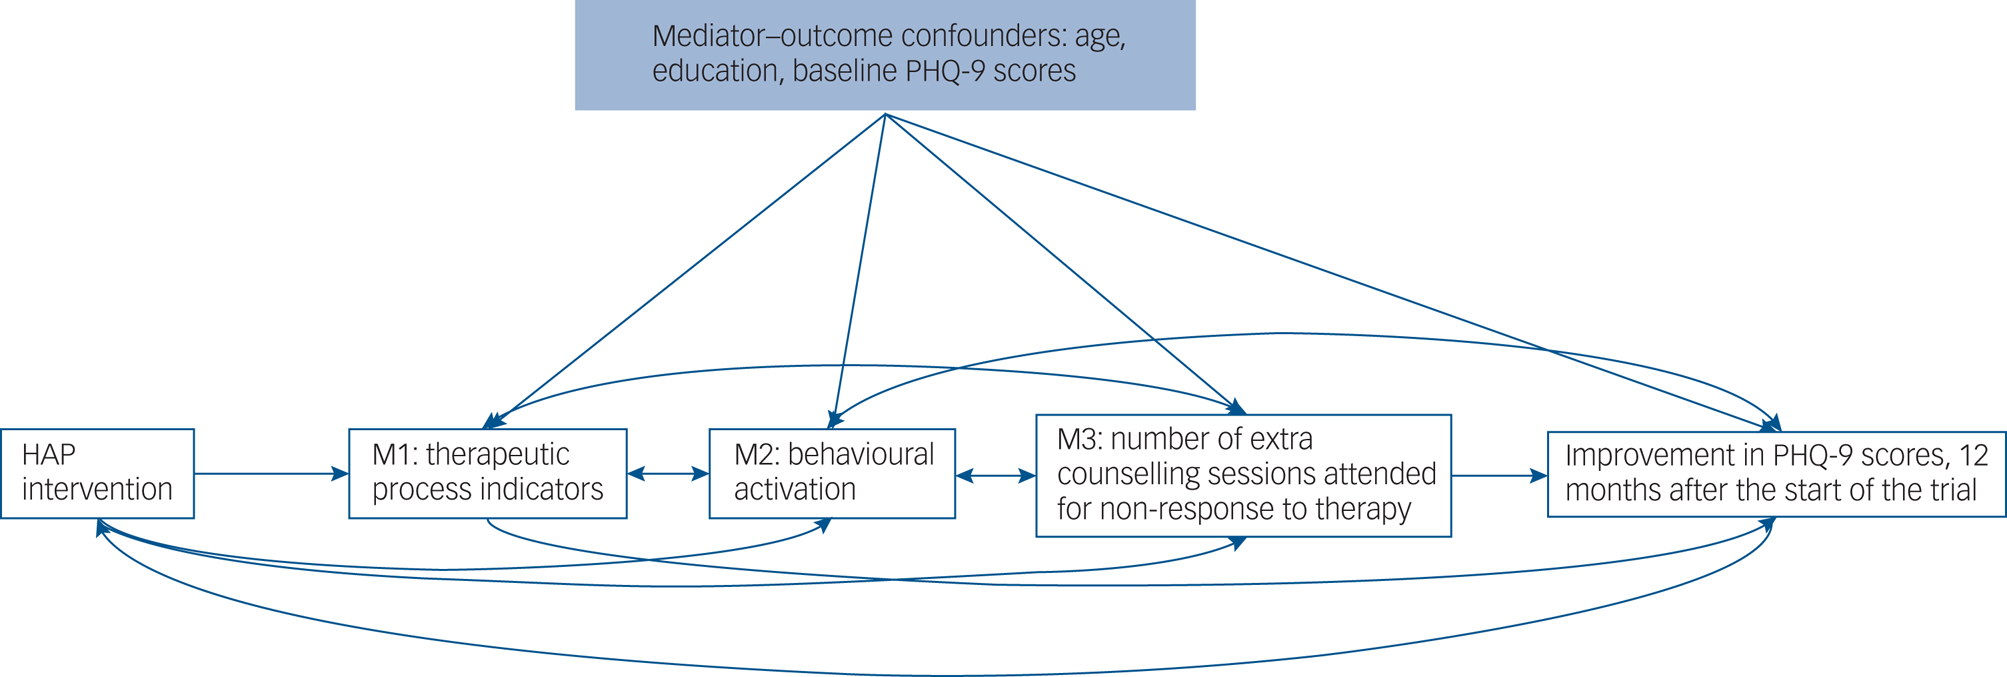 Total-effect model and mediation model. A mediator model decomposes the